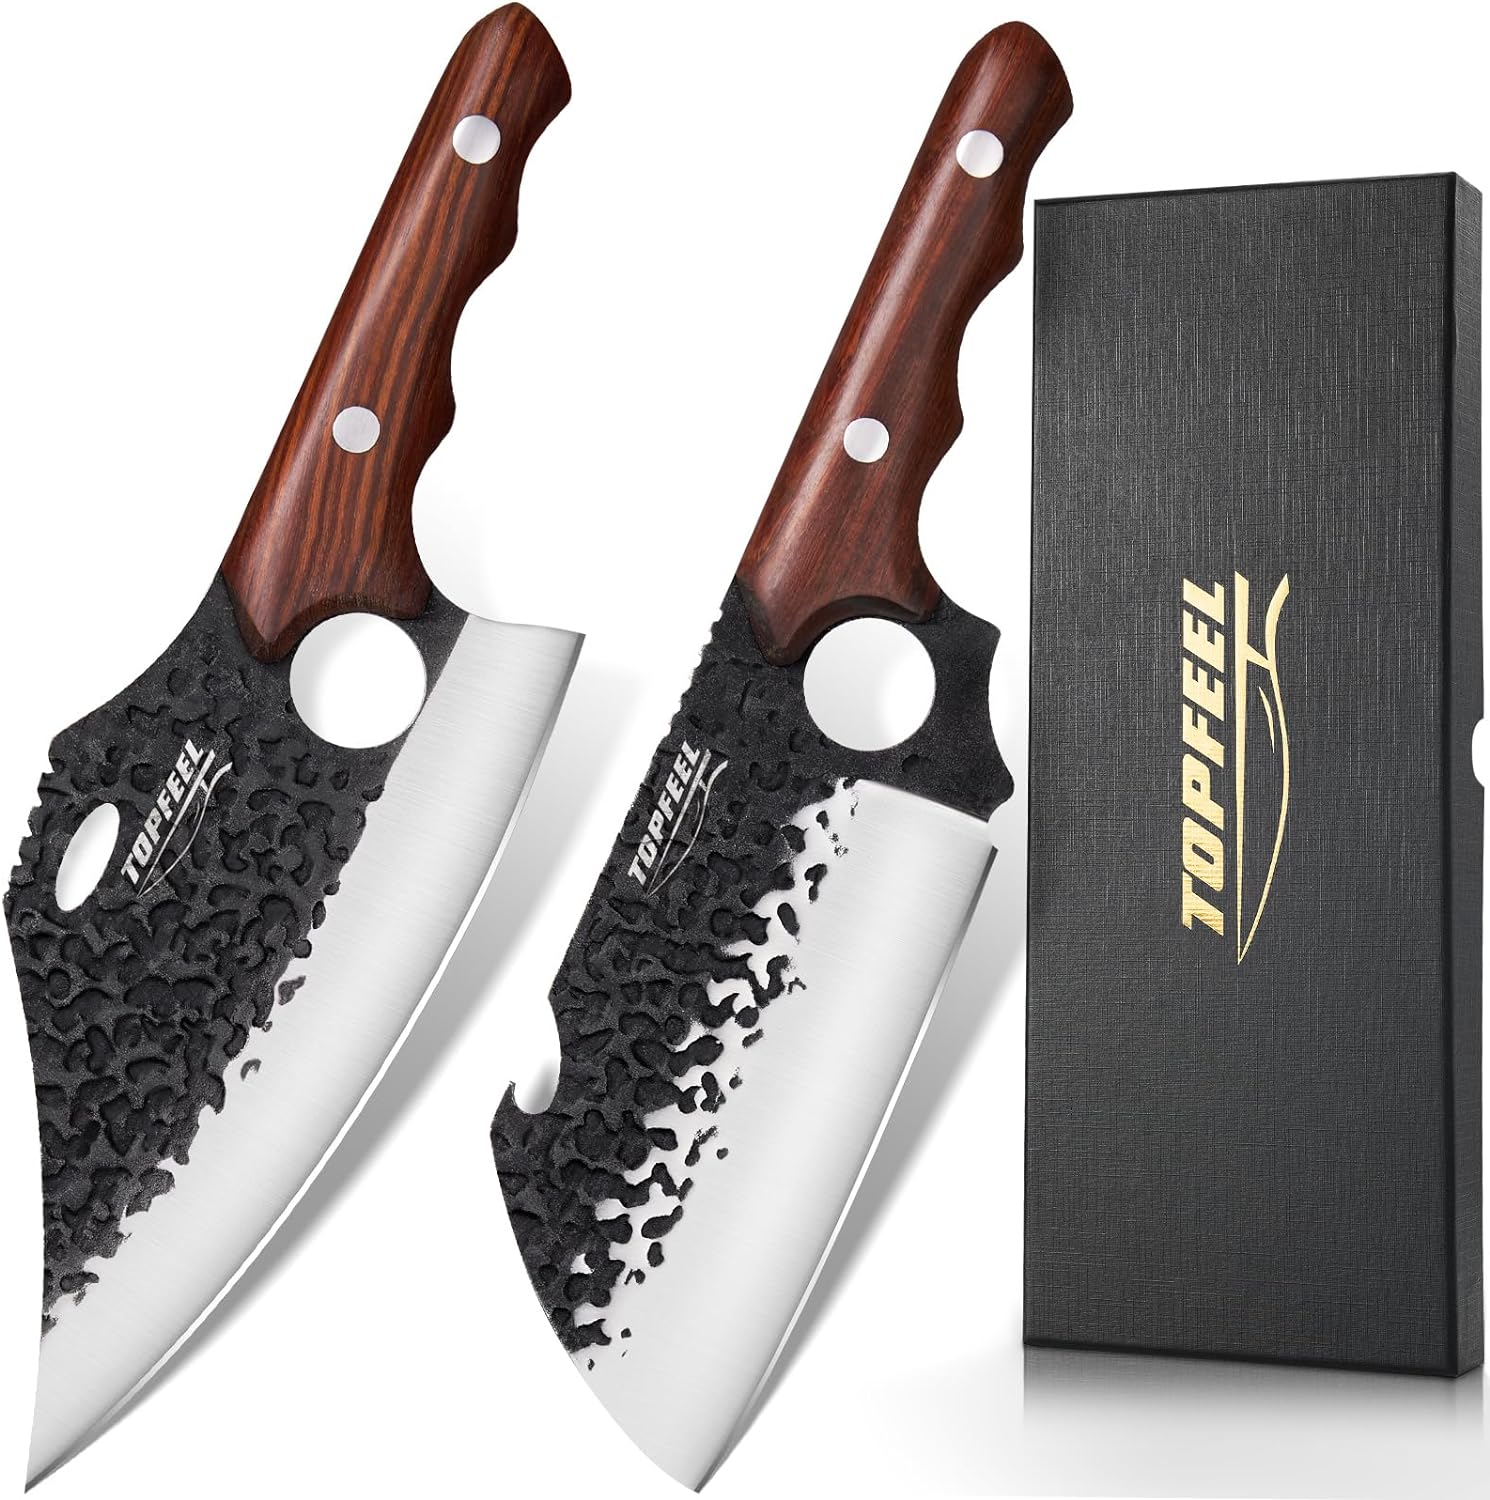 Topfeel 2PCS Butcher Cleaver Knife Set- Meat Clvear Knife & Tactical Chopper Knife, Hand Forged Meat Cutting Chopping Knife for Home, Outdoor Cooking, Camping BBQ